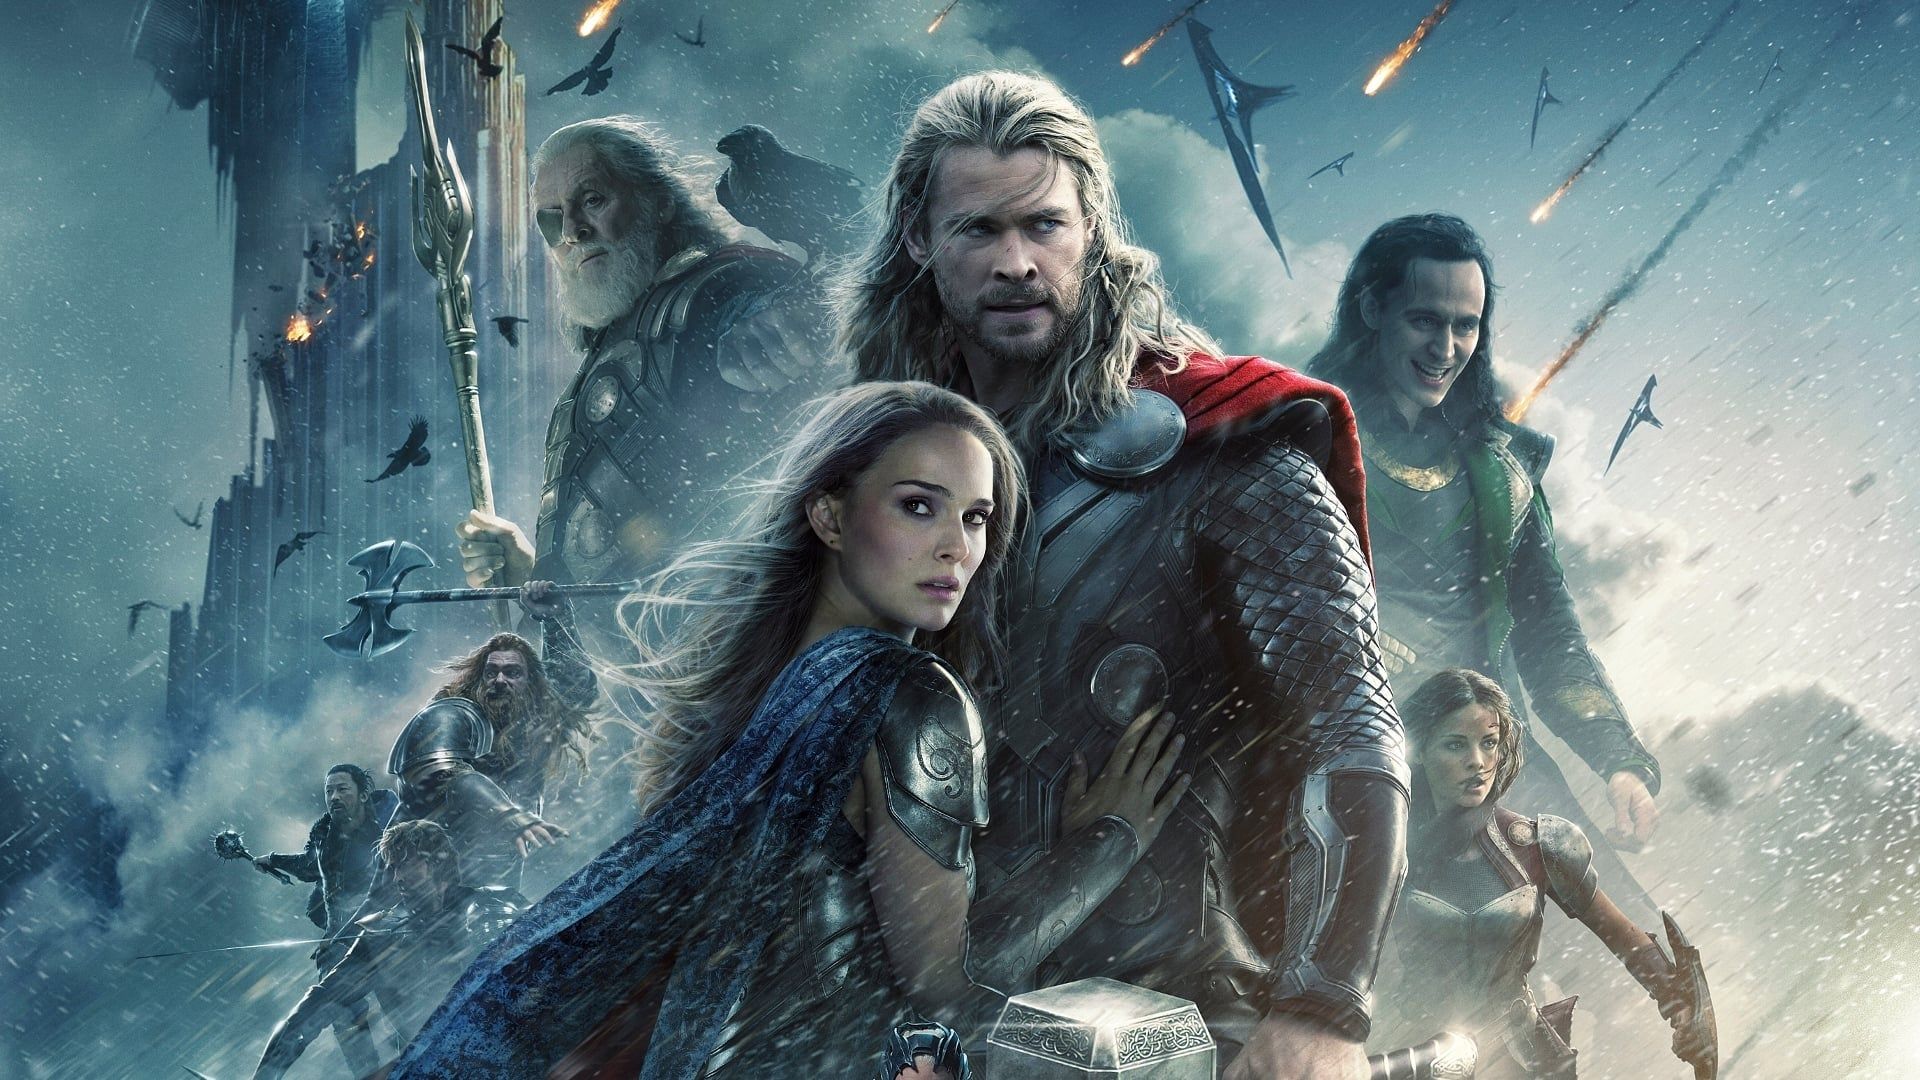 ‘Thor: The Dark World’ Director Speaks On Film’s Backlash; “I Lost the Will to Live as a Director”